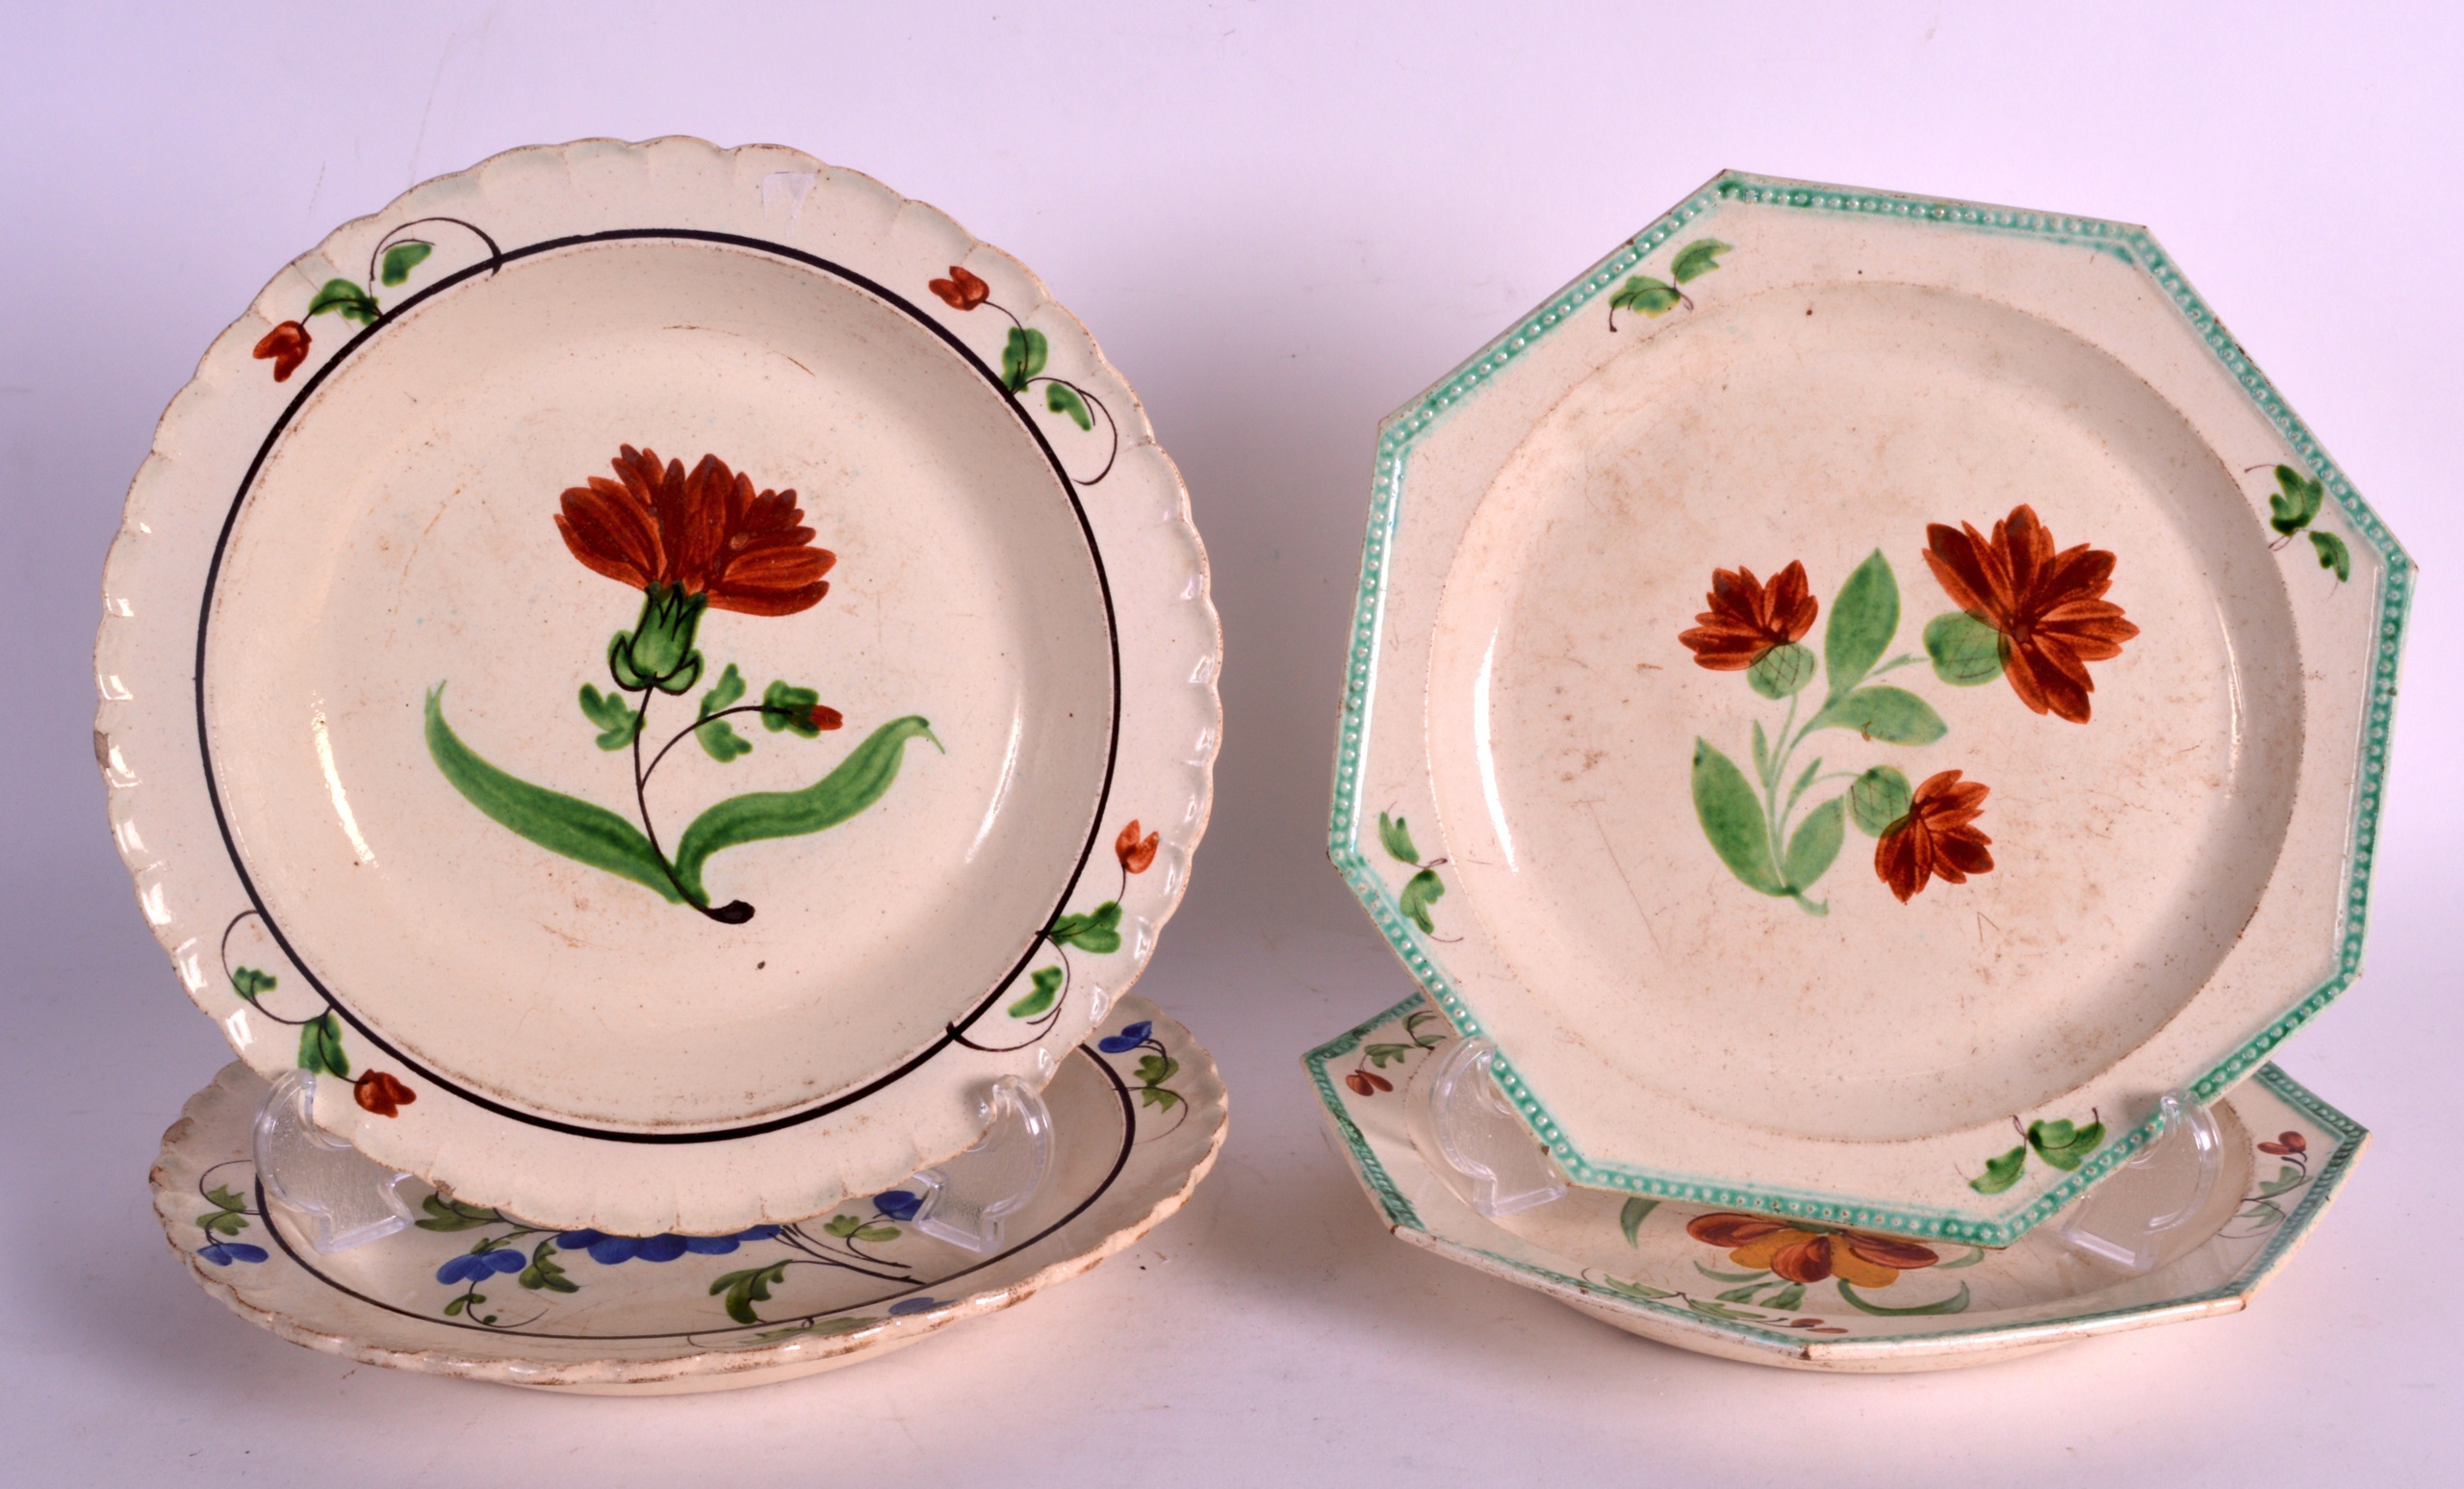 A PAIR OF 18TH/19TH CENTURY CREAMWARE OCTAGONAL PLATES together with two similar dishes. 8.5ins